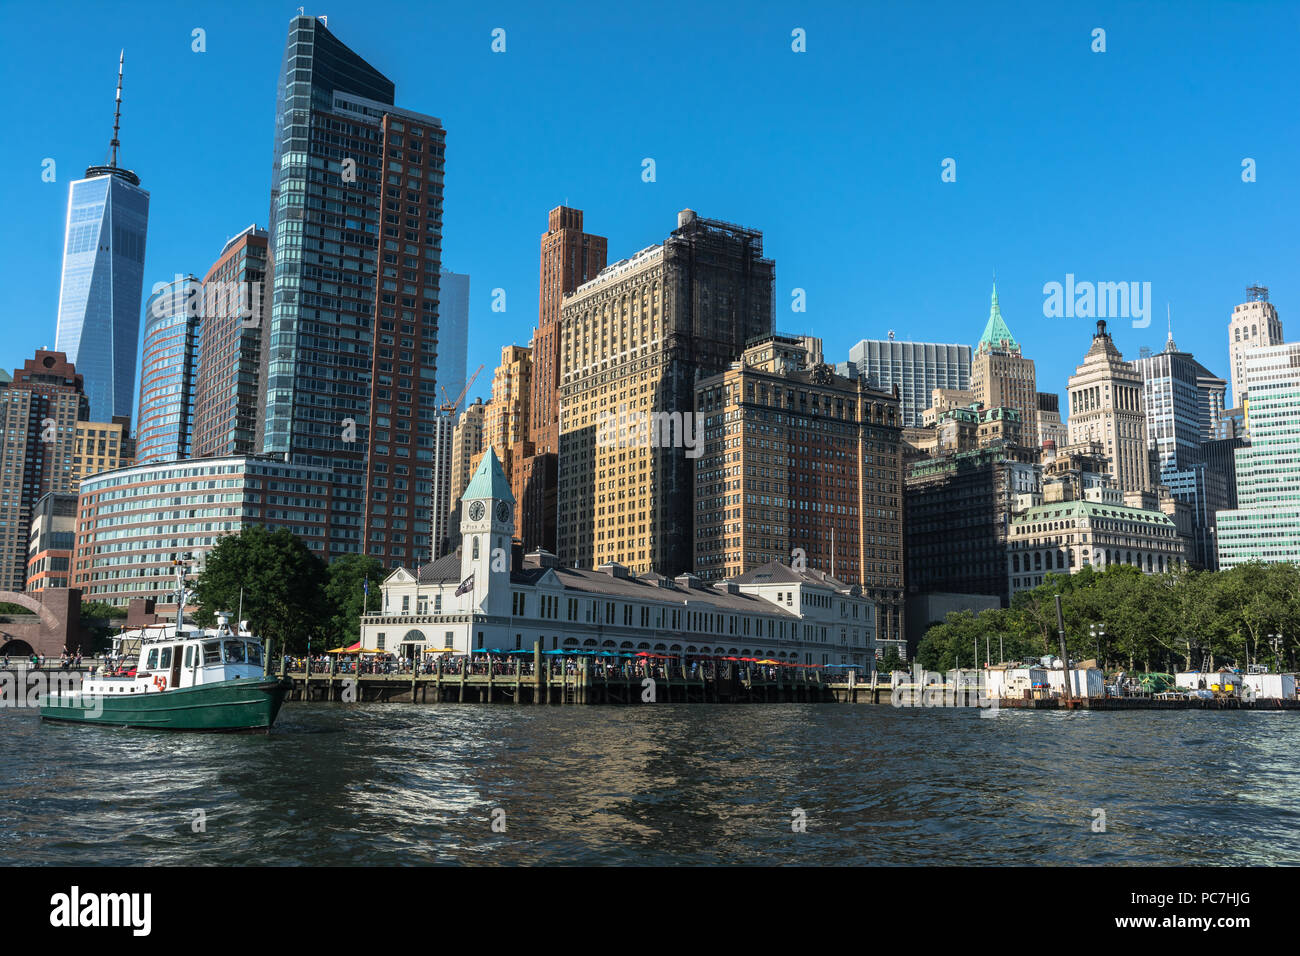 Manhattan,New York City,USA - June 30, 2018 : Skyscrapers and Pier A at Battery Park view from the Hudson River Stock Photo